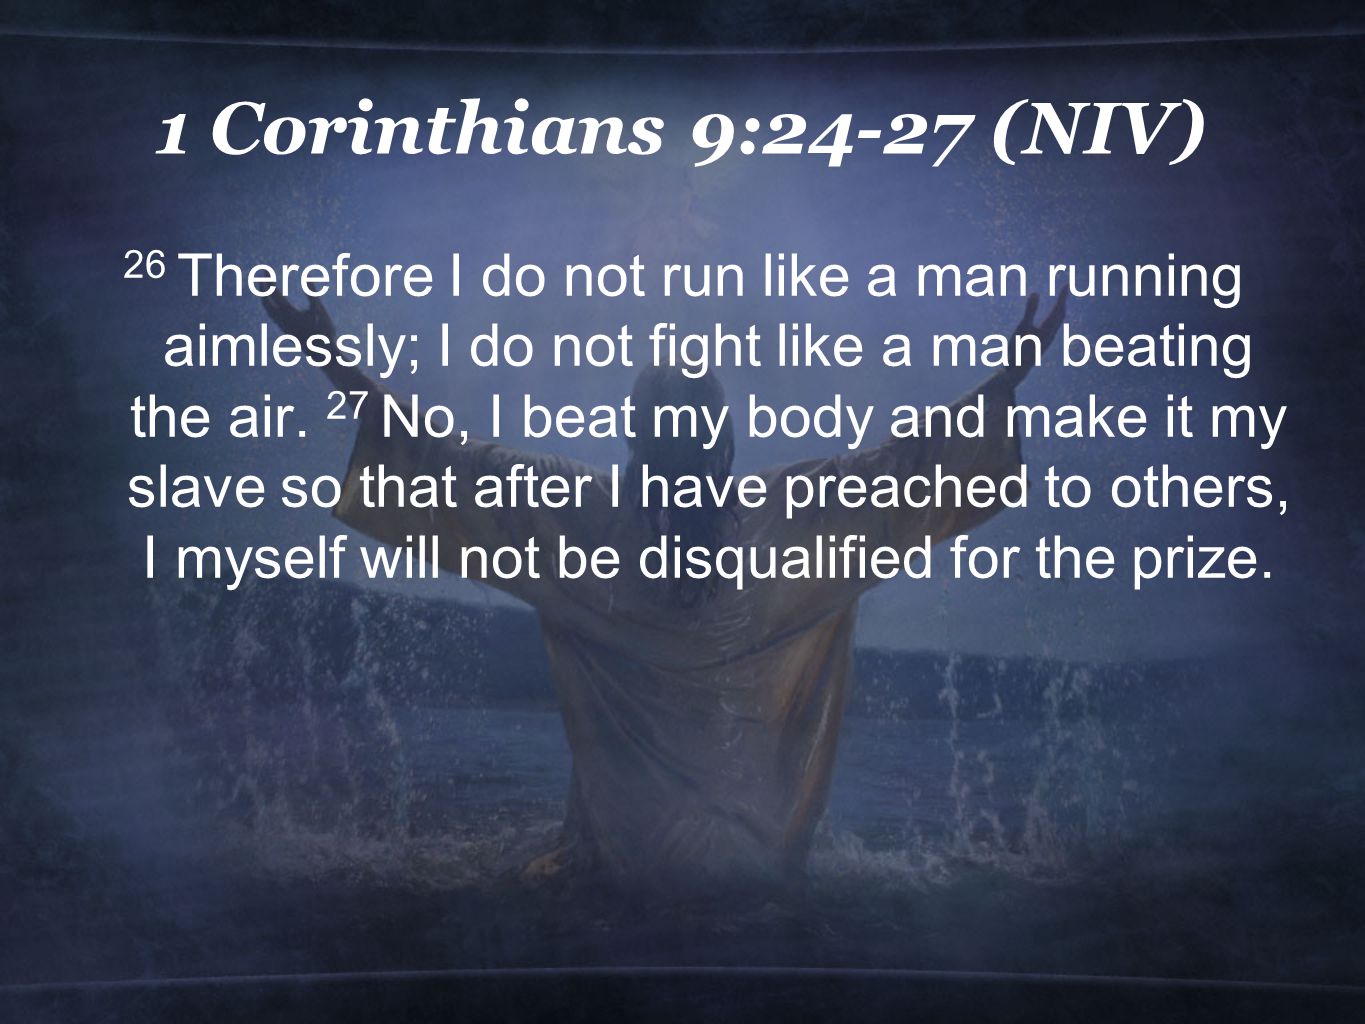 1 Corinthians 9:24-27 (NIV) 26 Therefore I do not run like a man running aimlessly; I do not fight like a man beating the air.